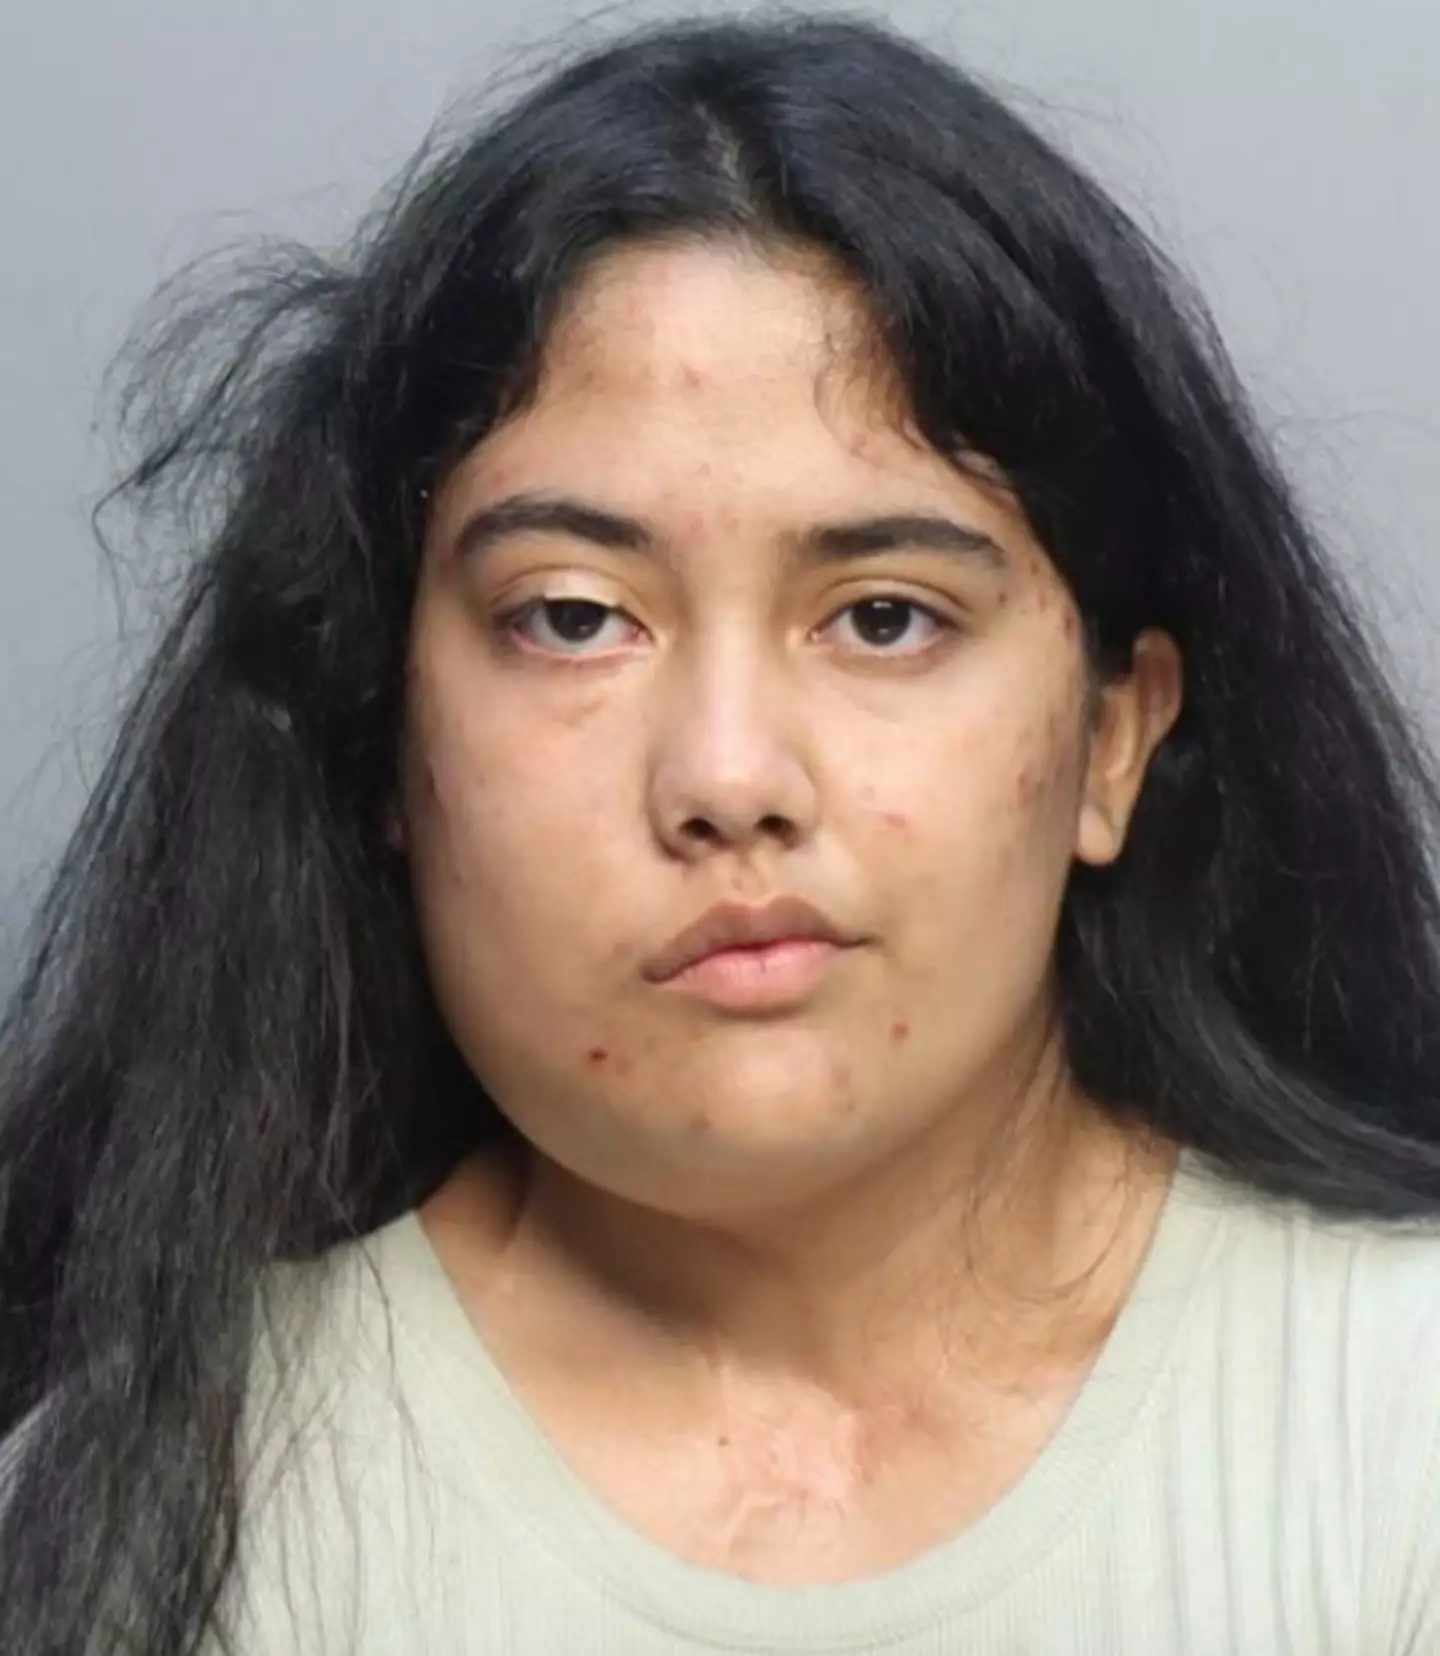 Jazmin Paez is accused of trying to hire a hitman to murder her son.